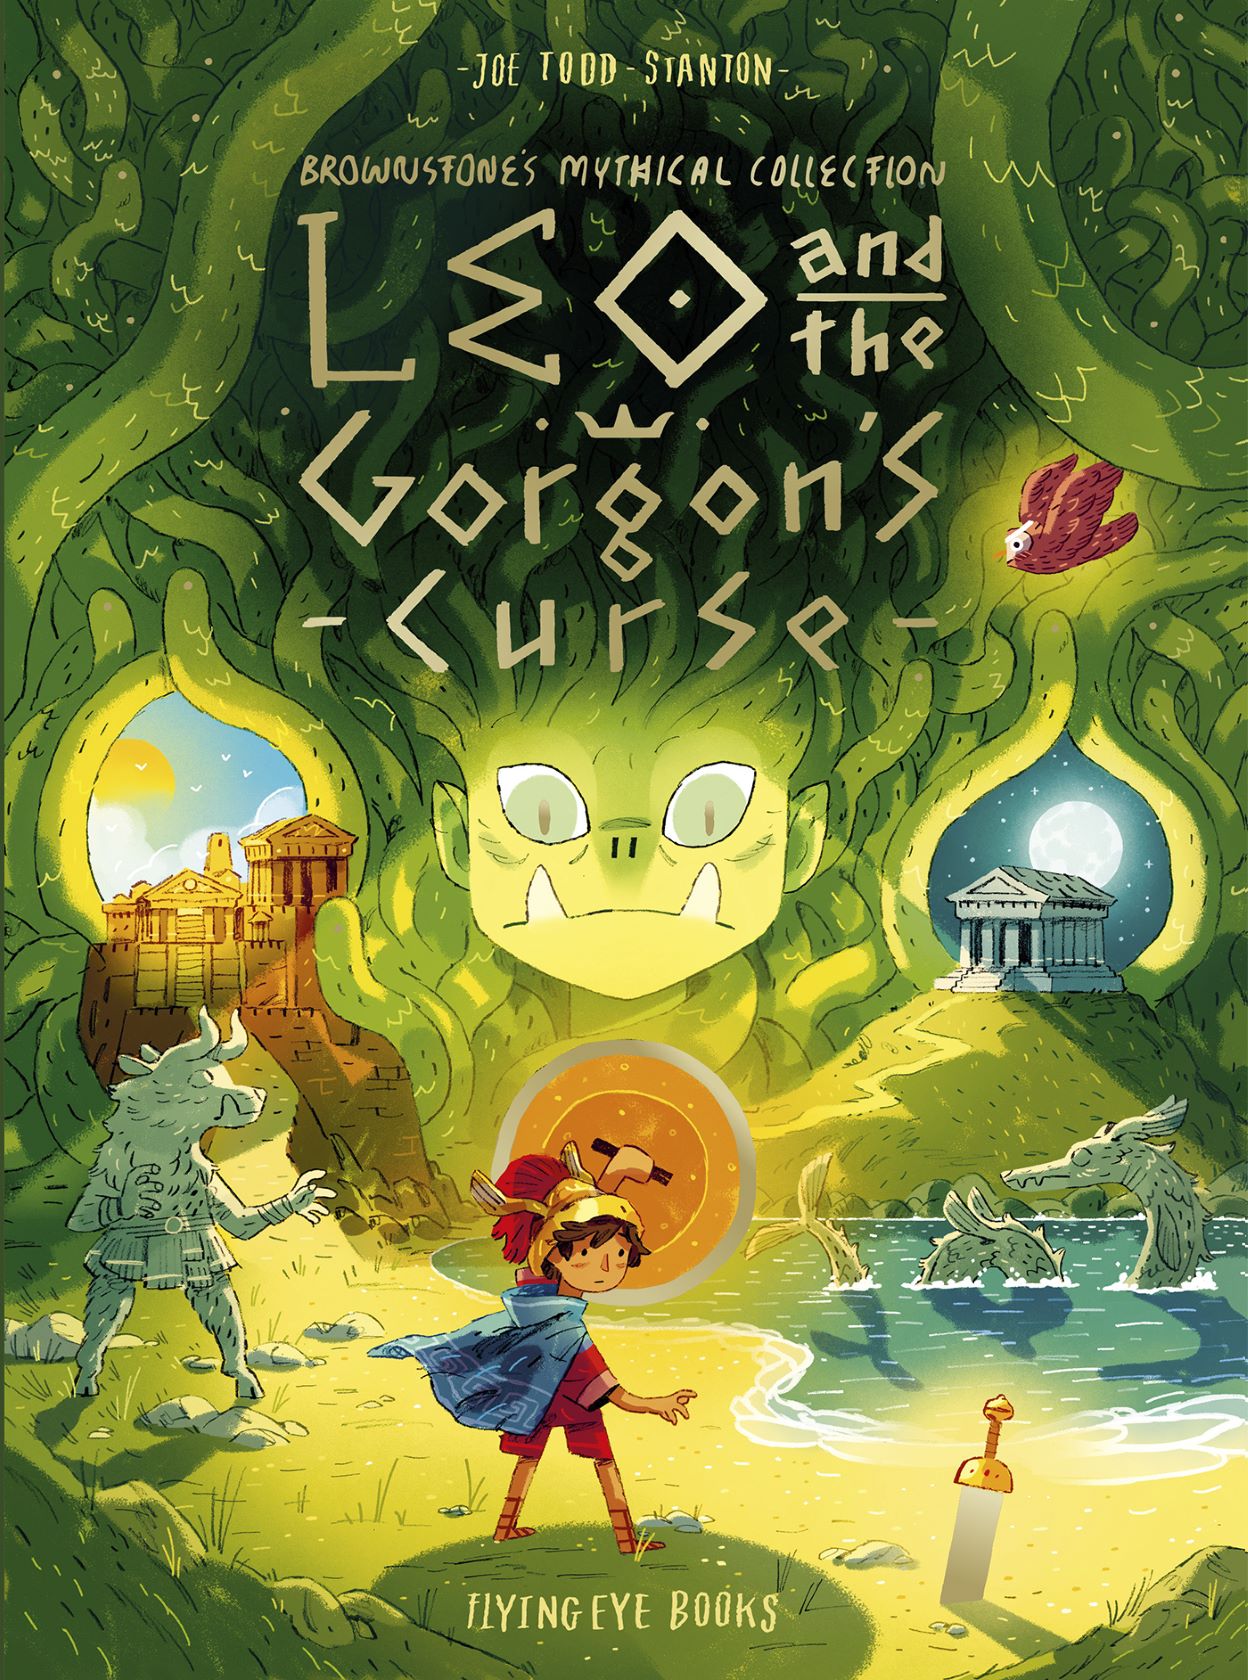 Brownstone's Mythical Collection Volume 4 Leo and the Gorgon's Curse